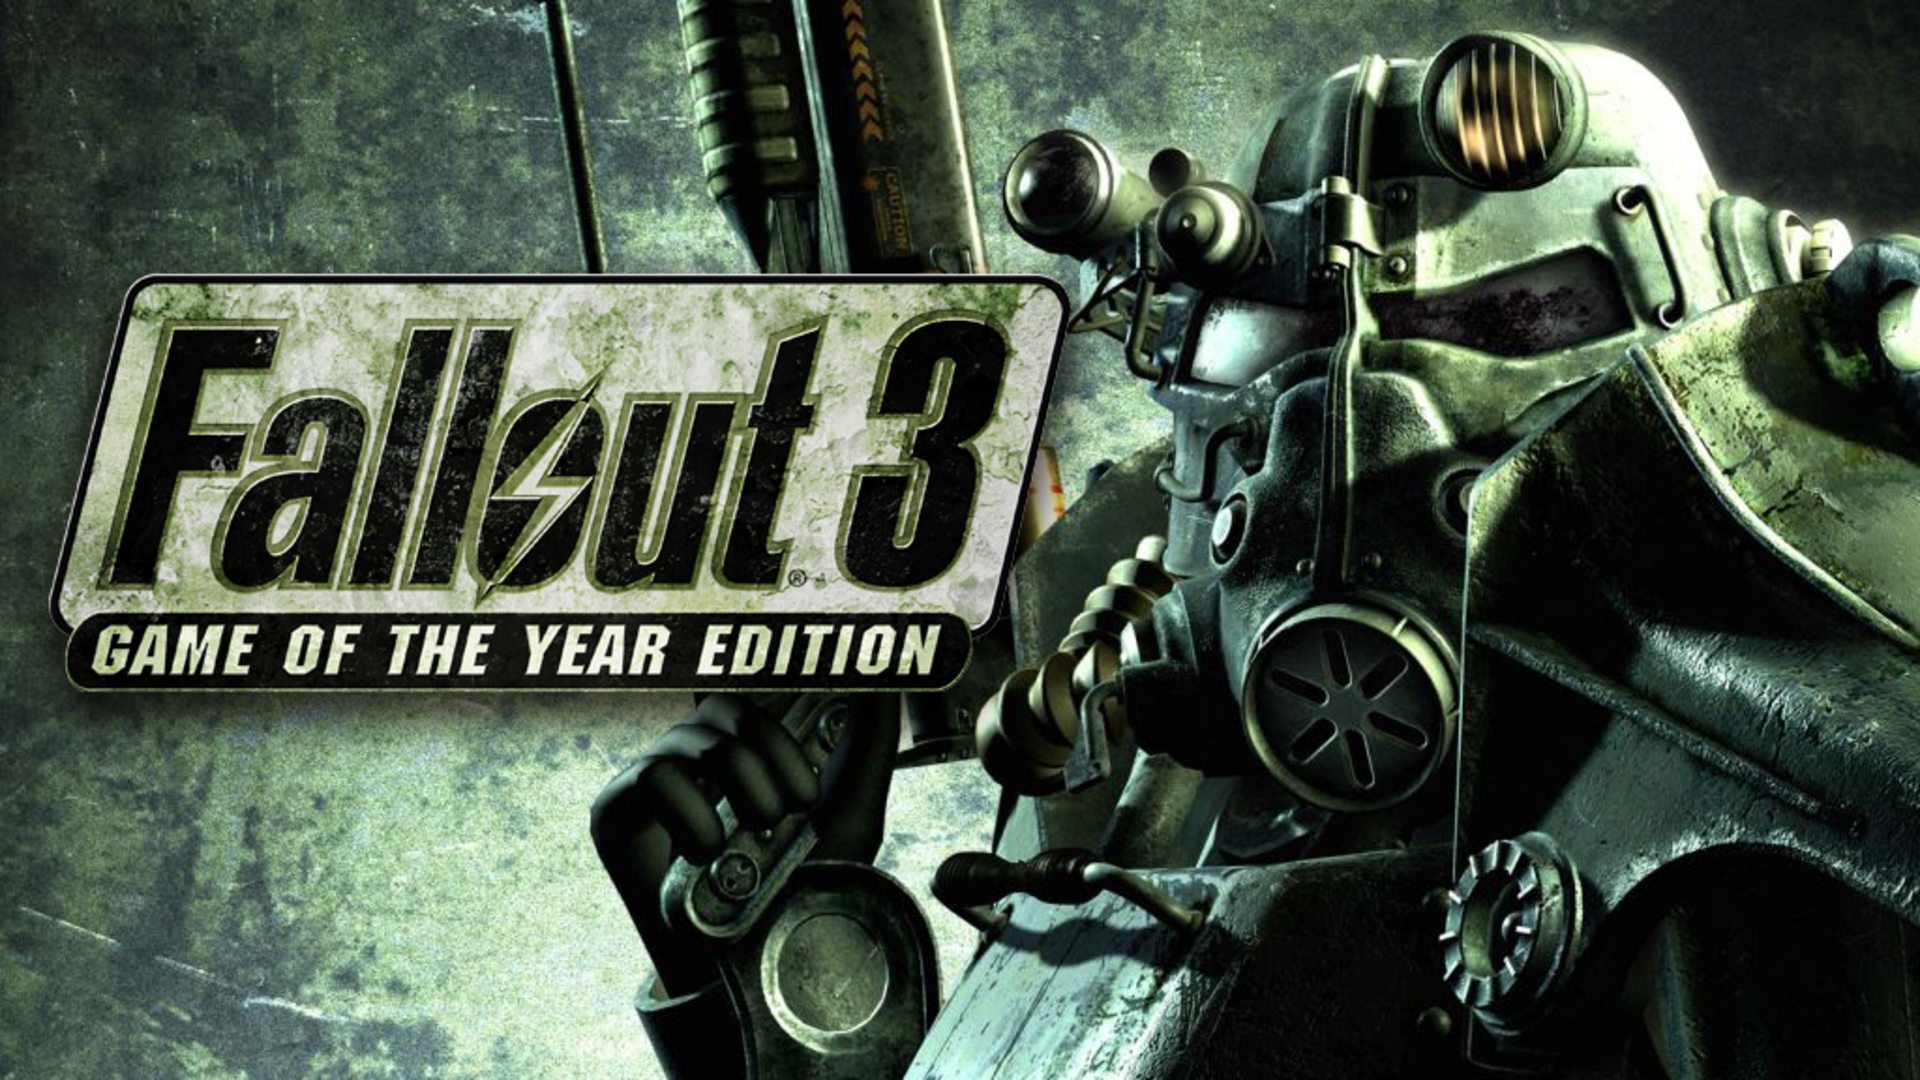 find fallout 3 product key on steam